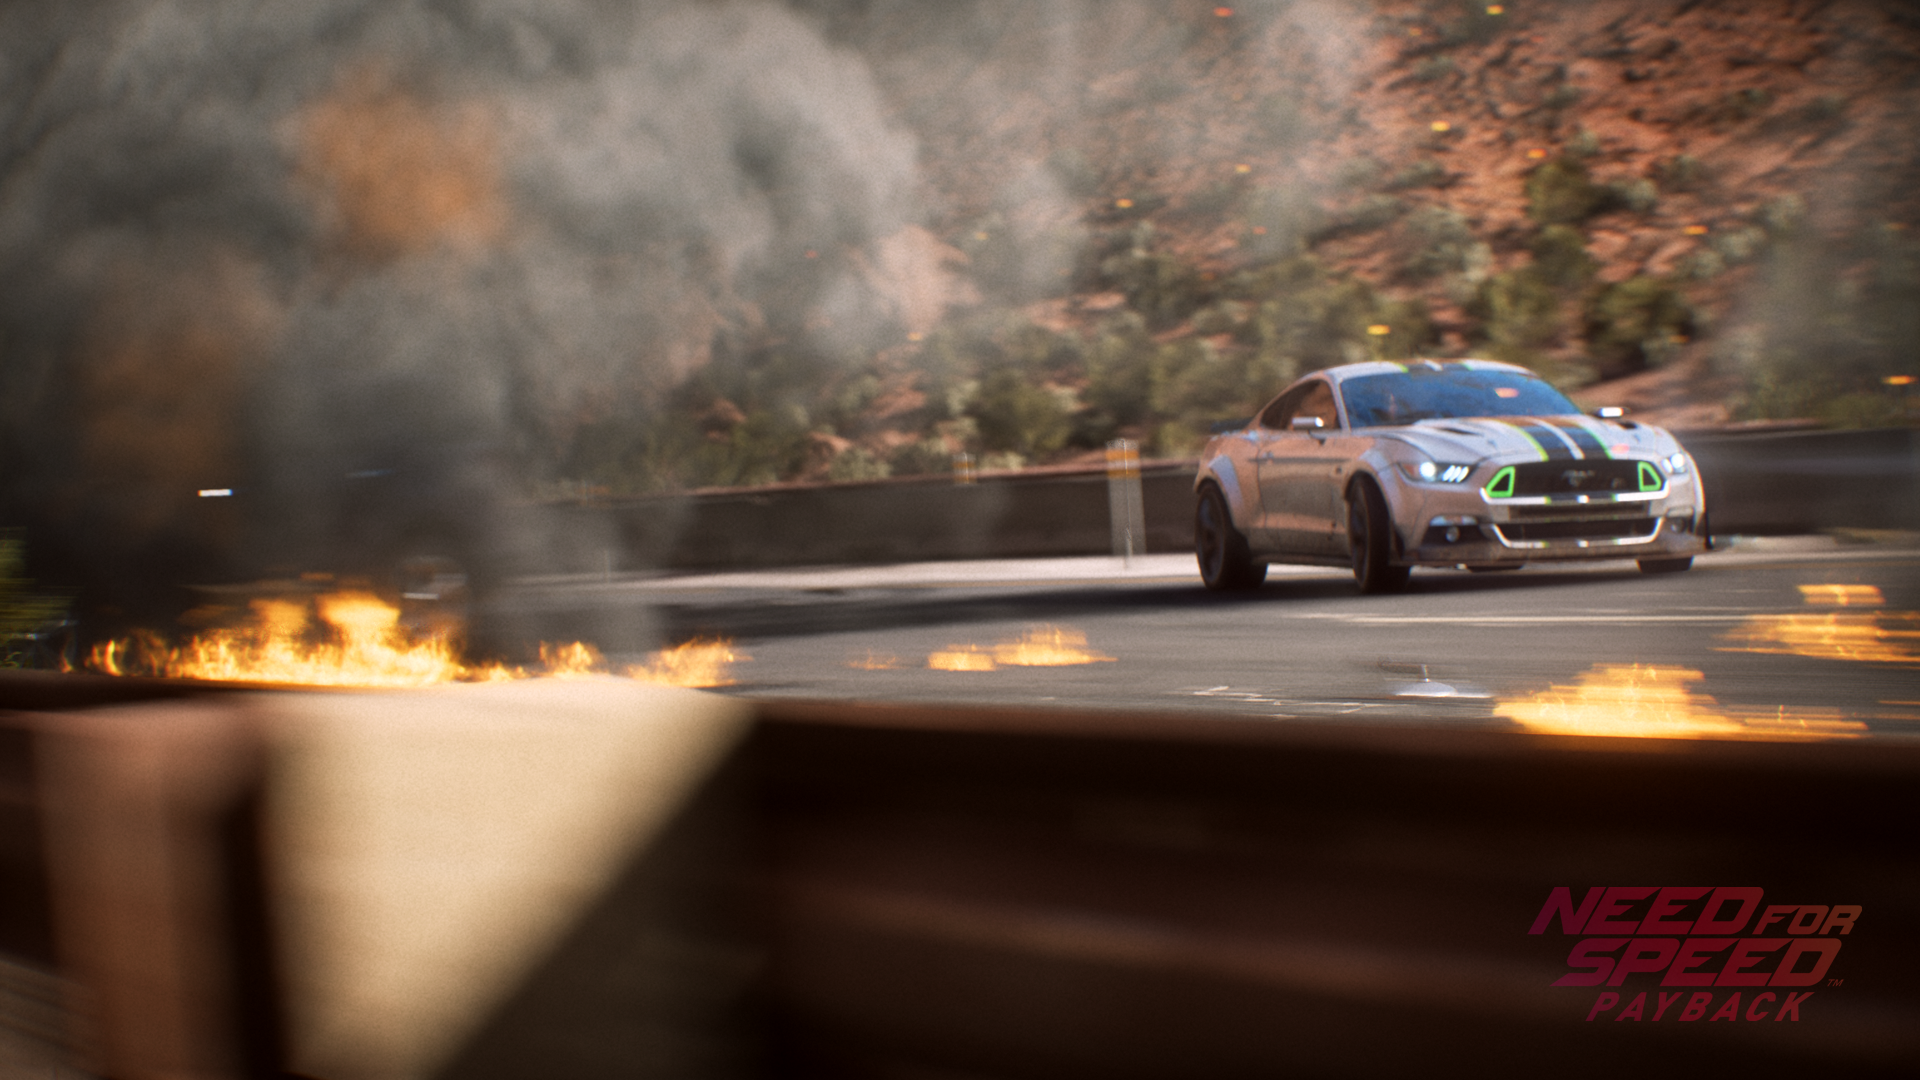 nfs-payback-highway-heist-featured-image.png.adapt.1920w.png